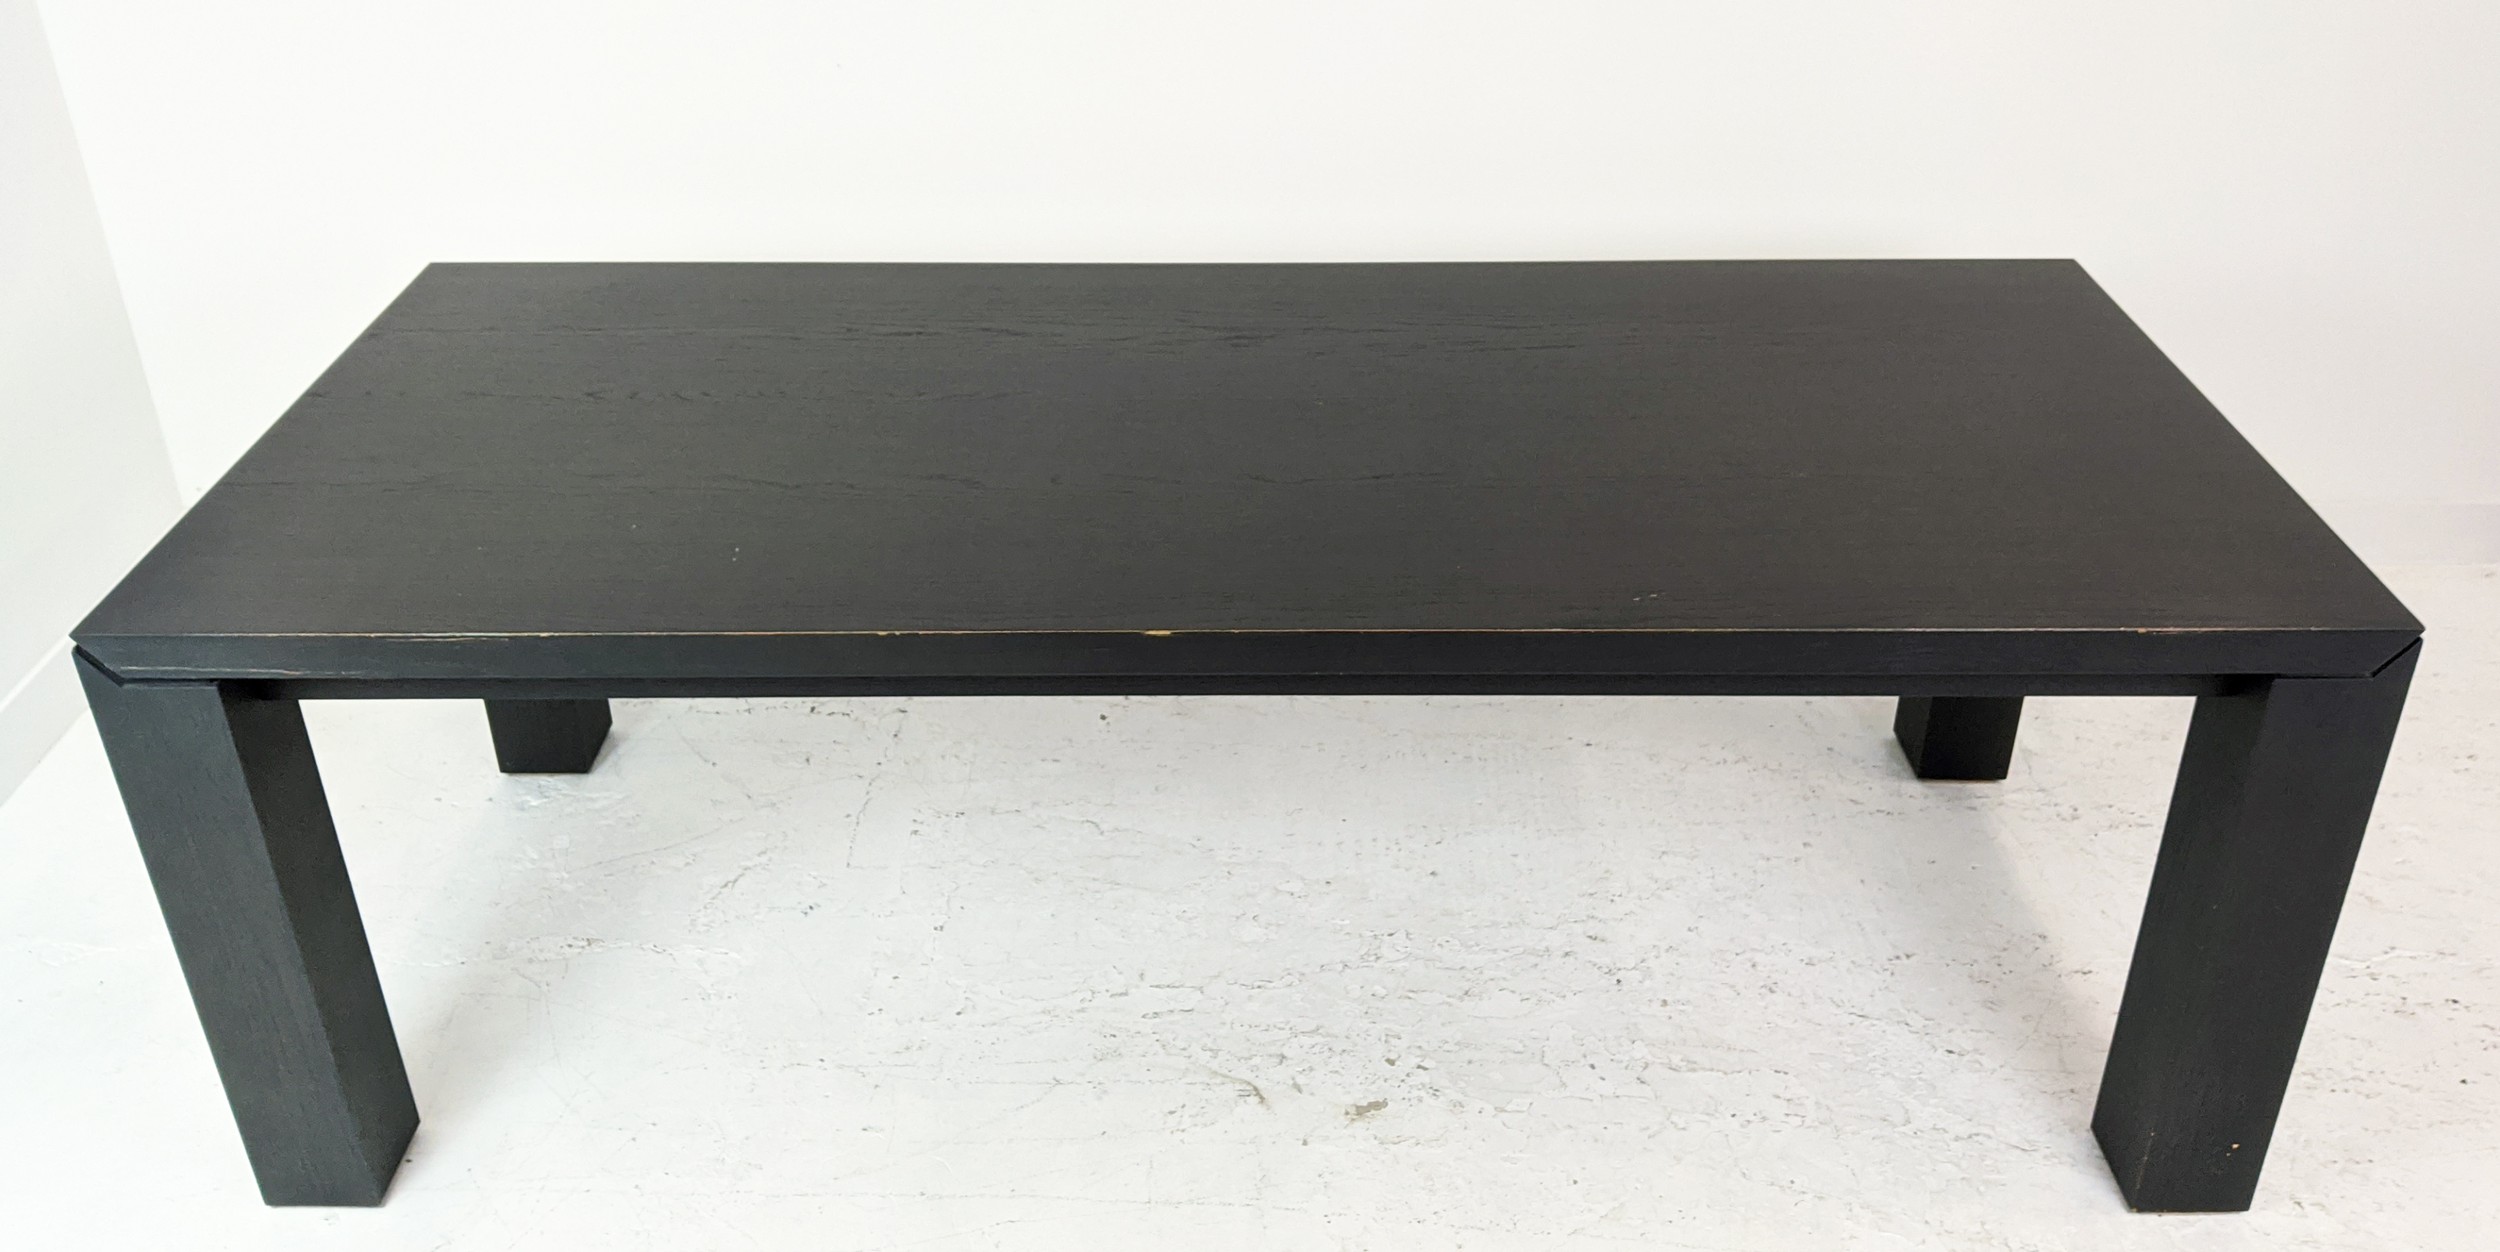 LIVING SPACE AMBROGIO EXTENDABLE DINING TABLE, 220cm x 95xm 76cm at smallest. - Image 4 of 11